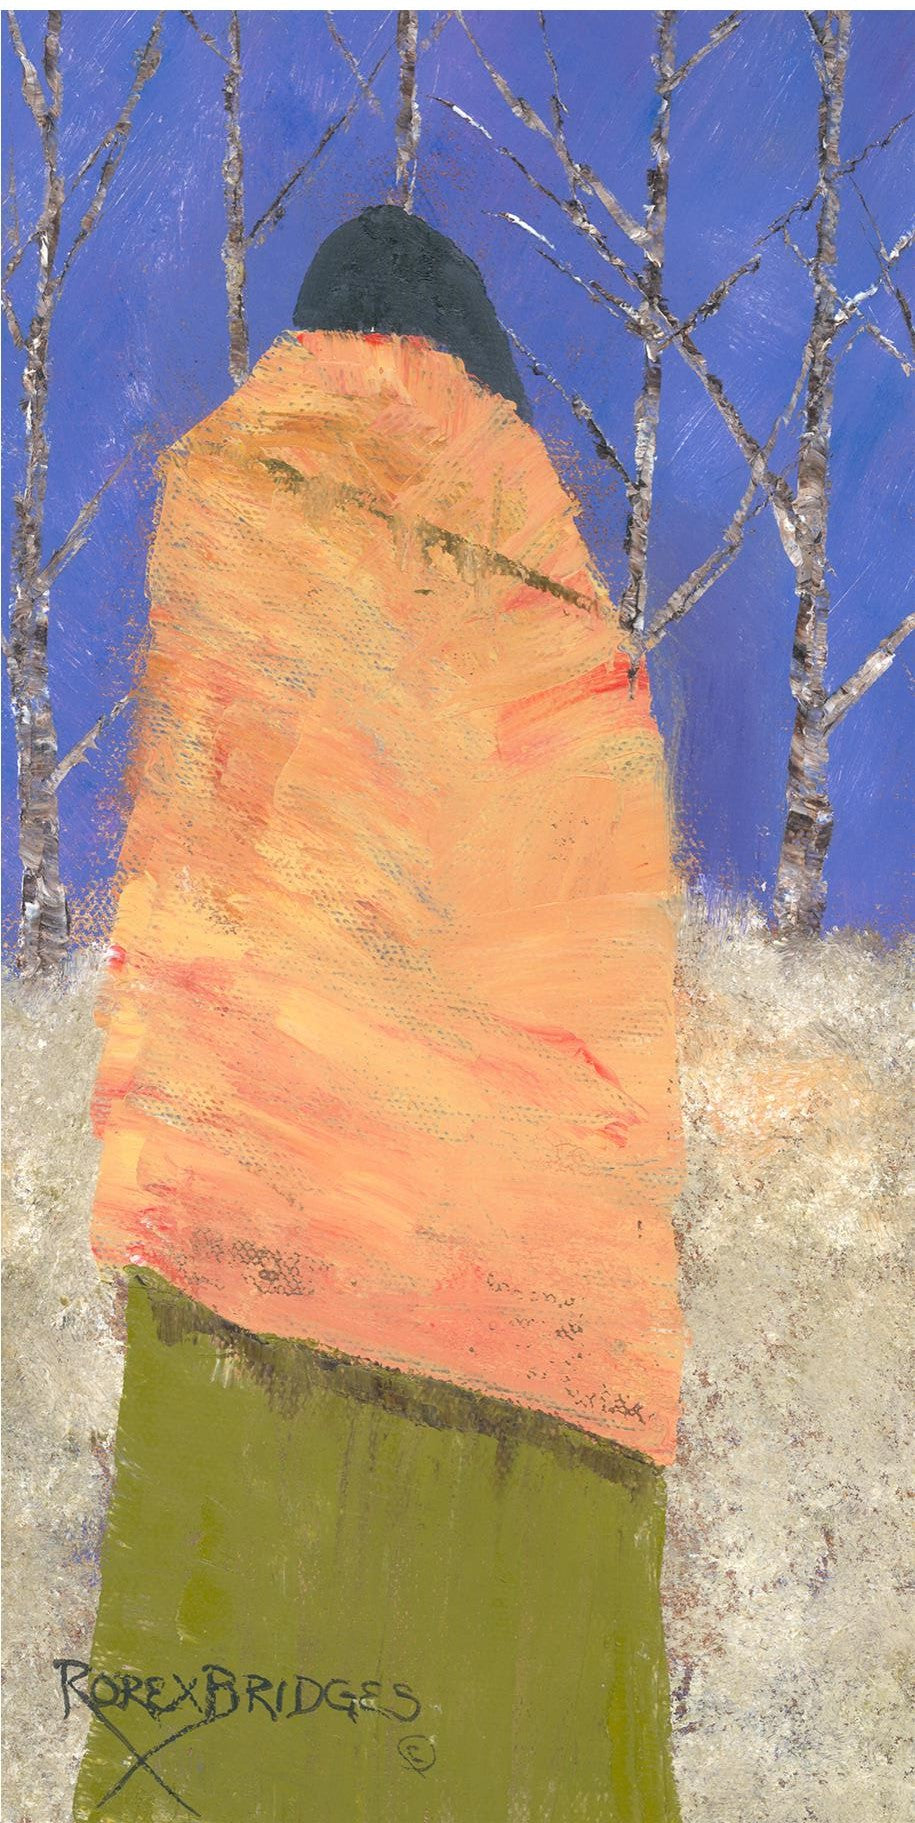 BIRCH TREES BEHIND WOMAN WITH YELLOW BLANKET